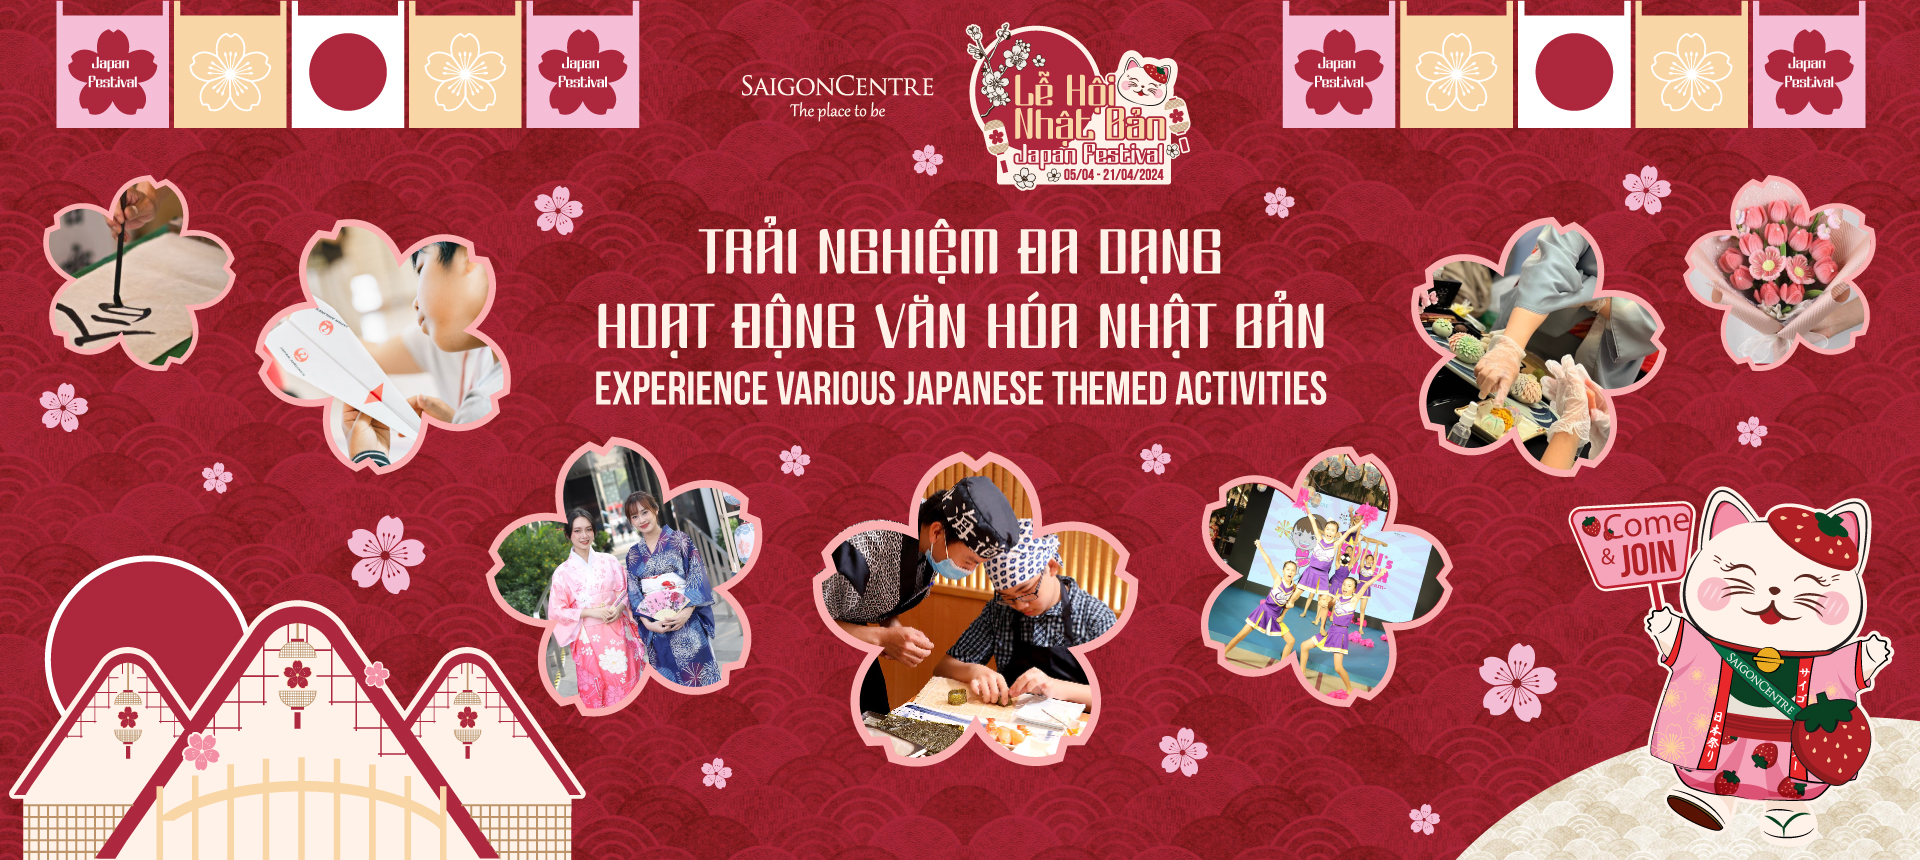 EXPERIENCE VARIOUS JAPANESE THEMED ACTIVITIES